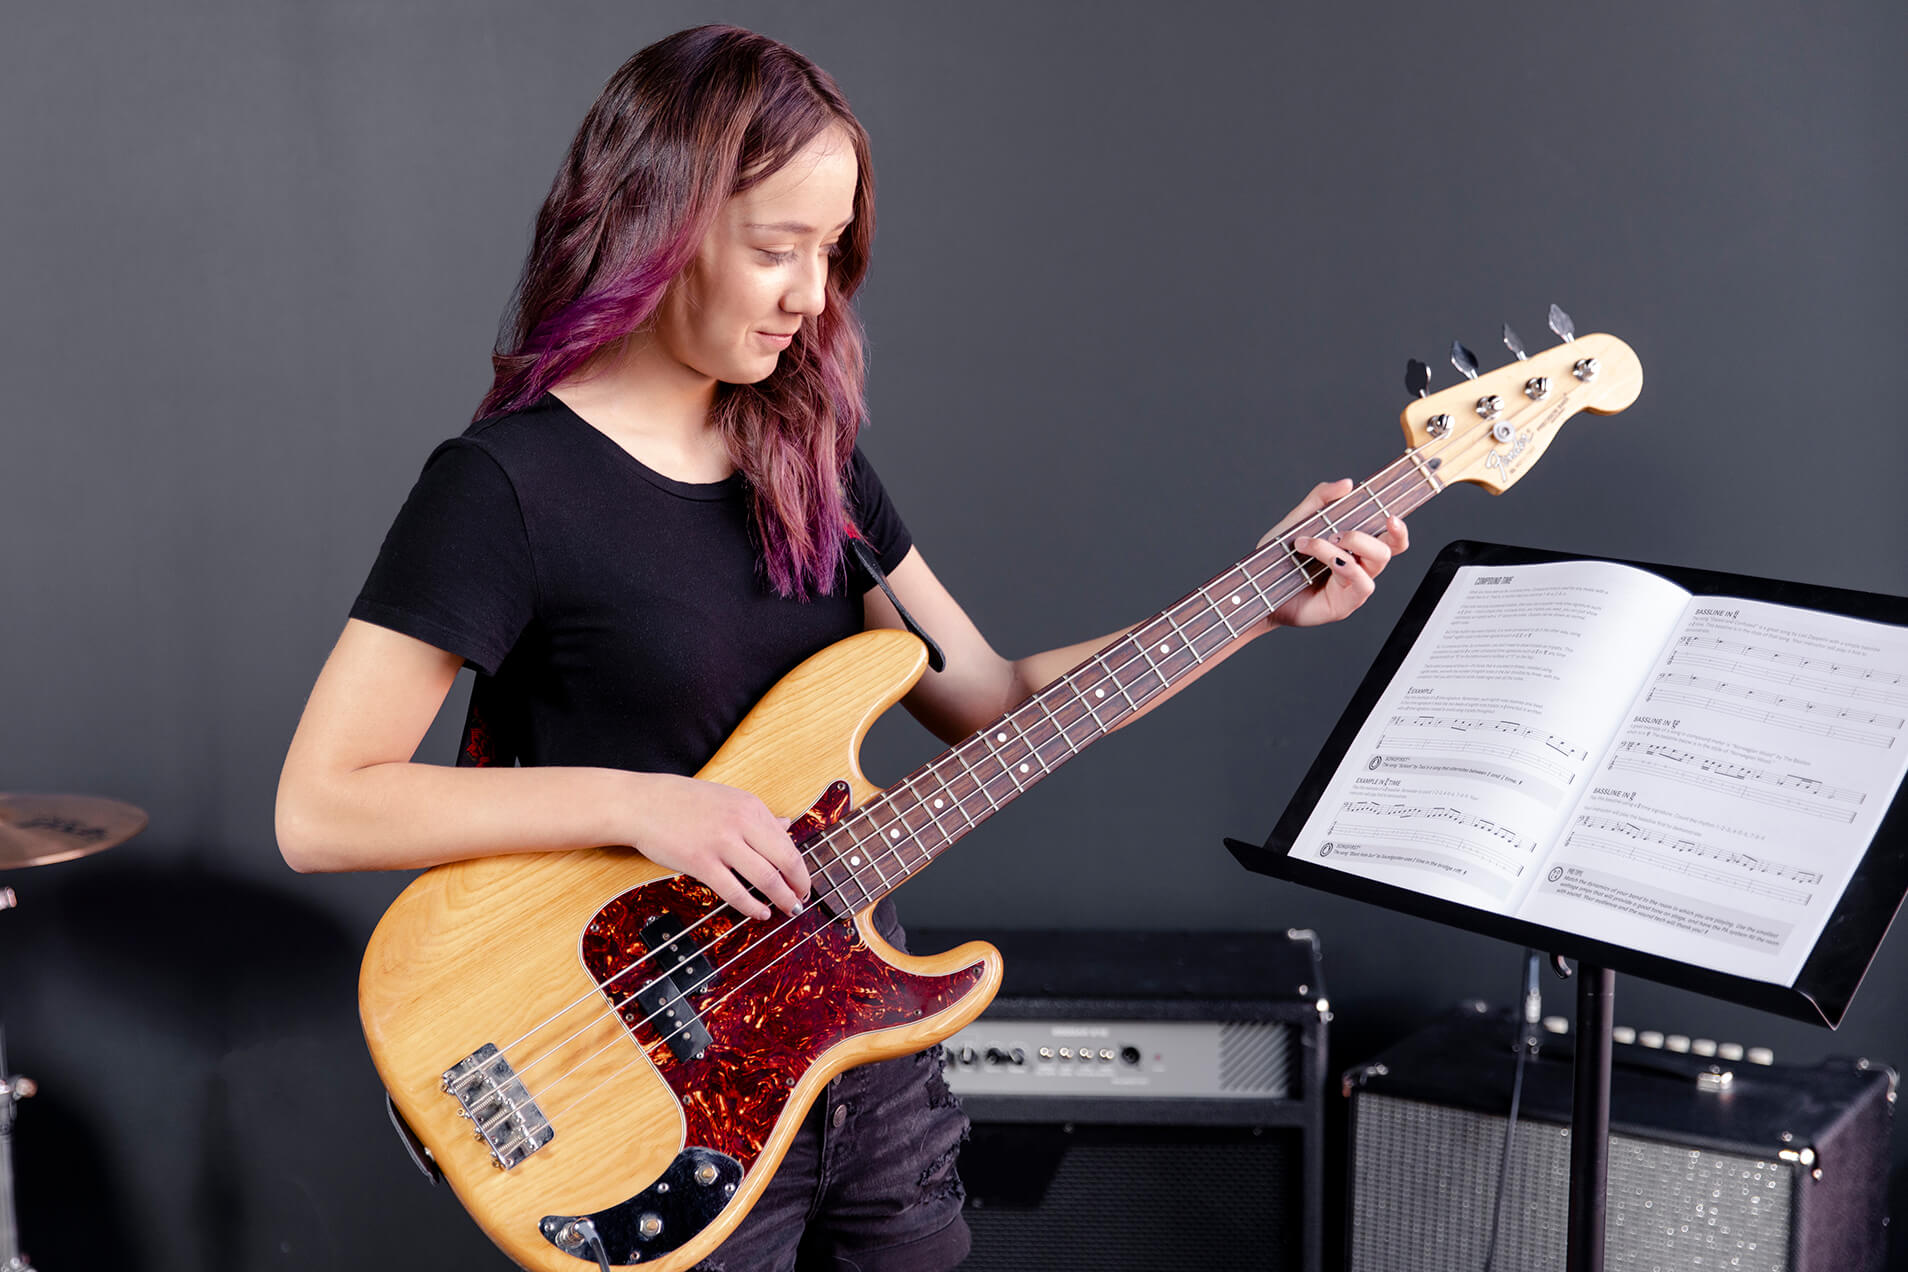 how to play bass guitar chords for beginners